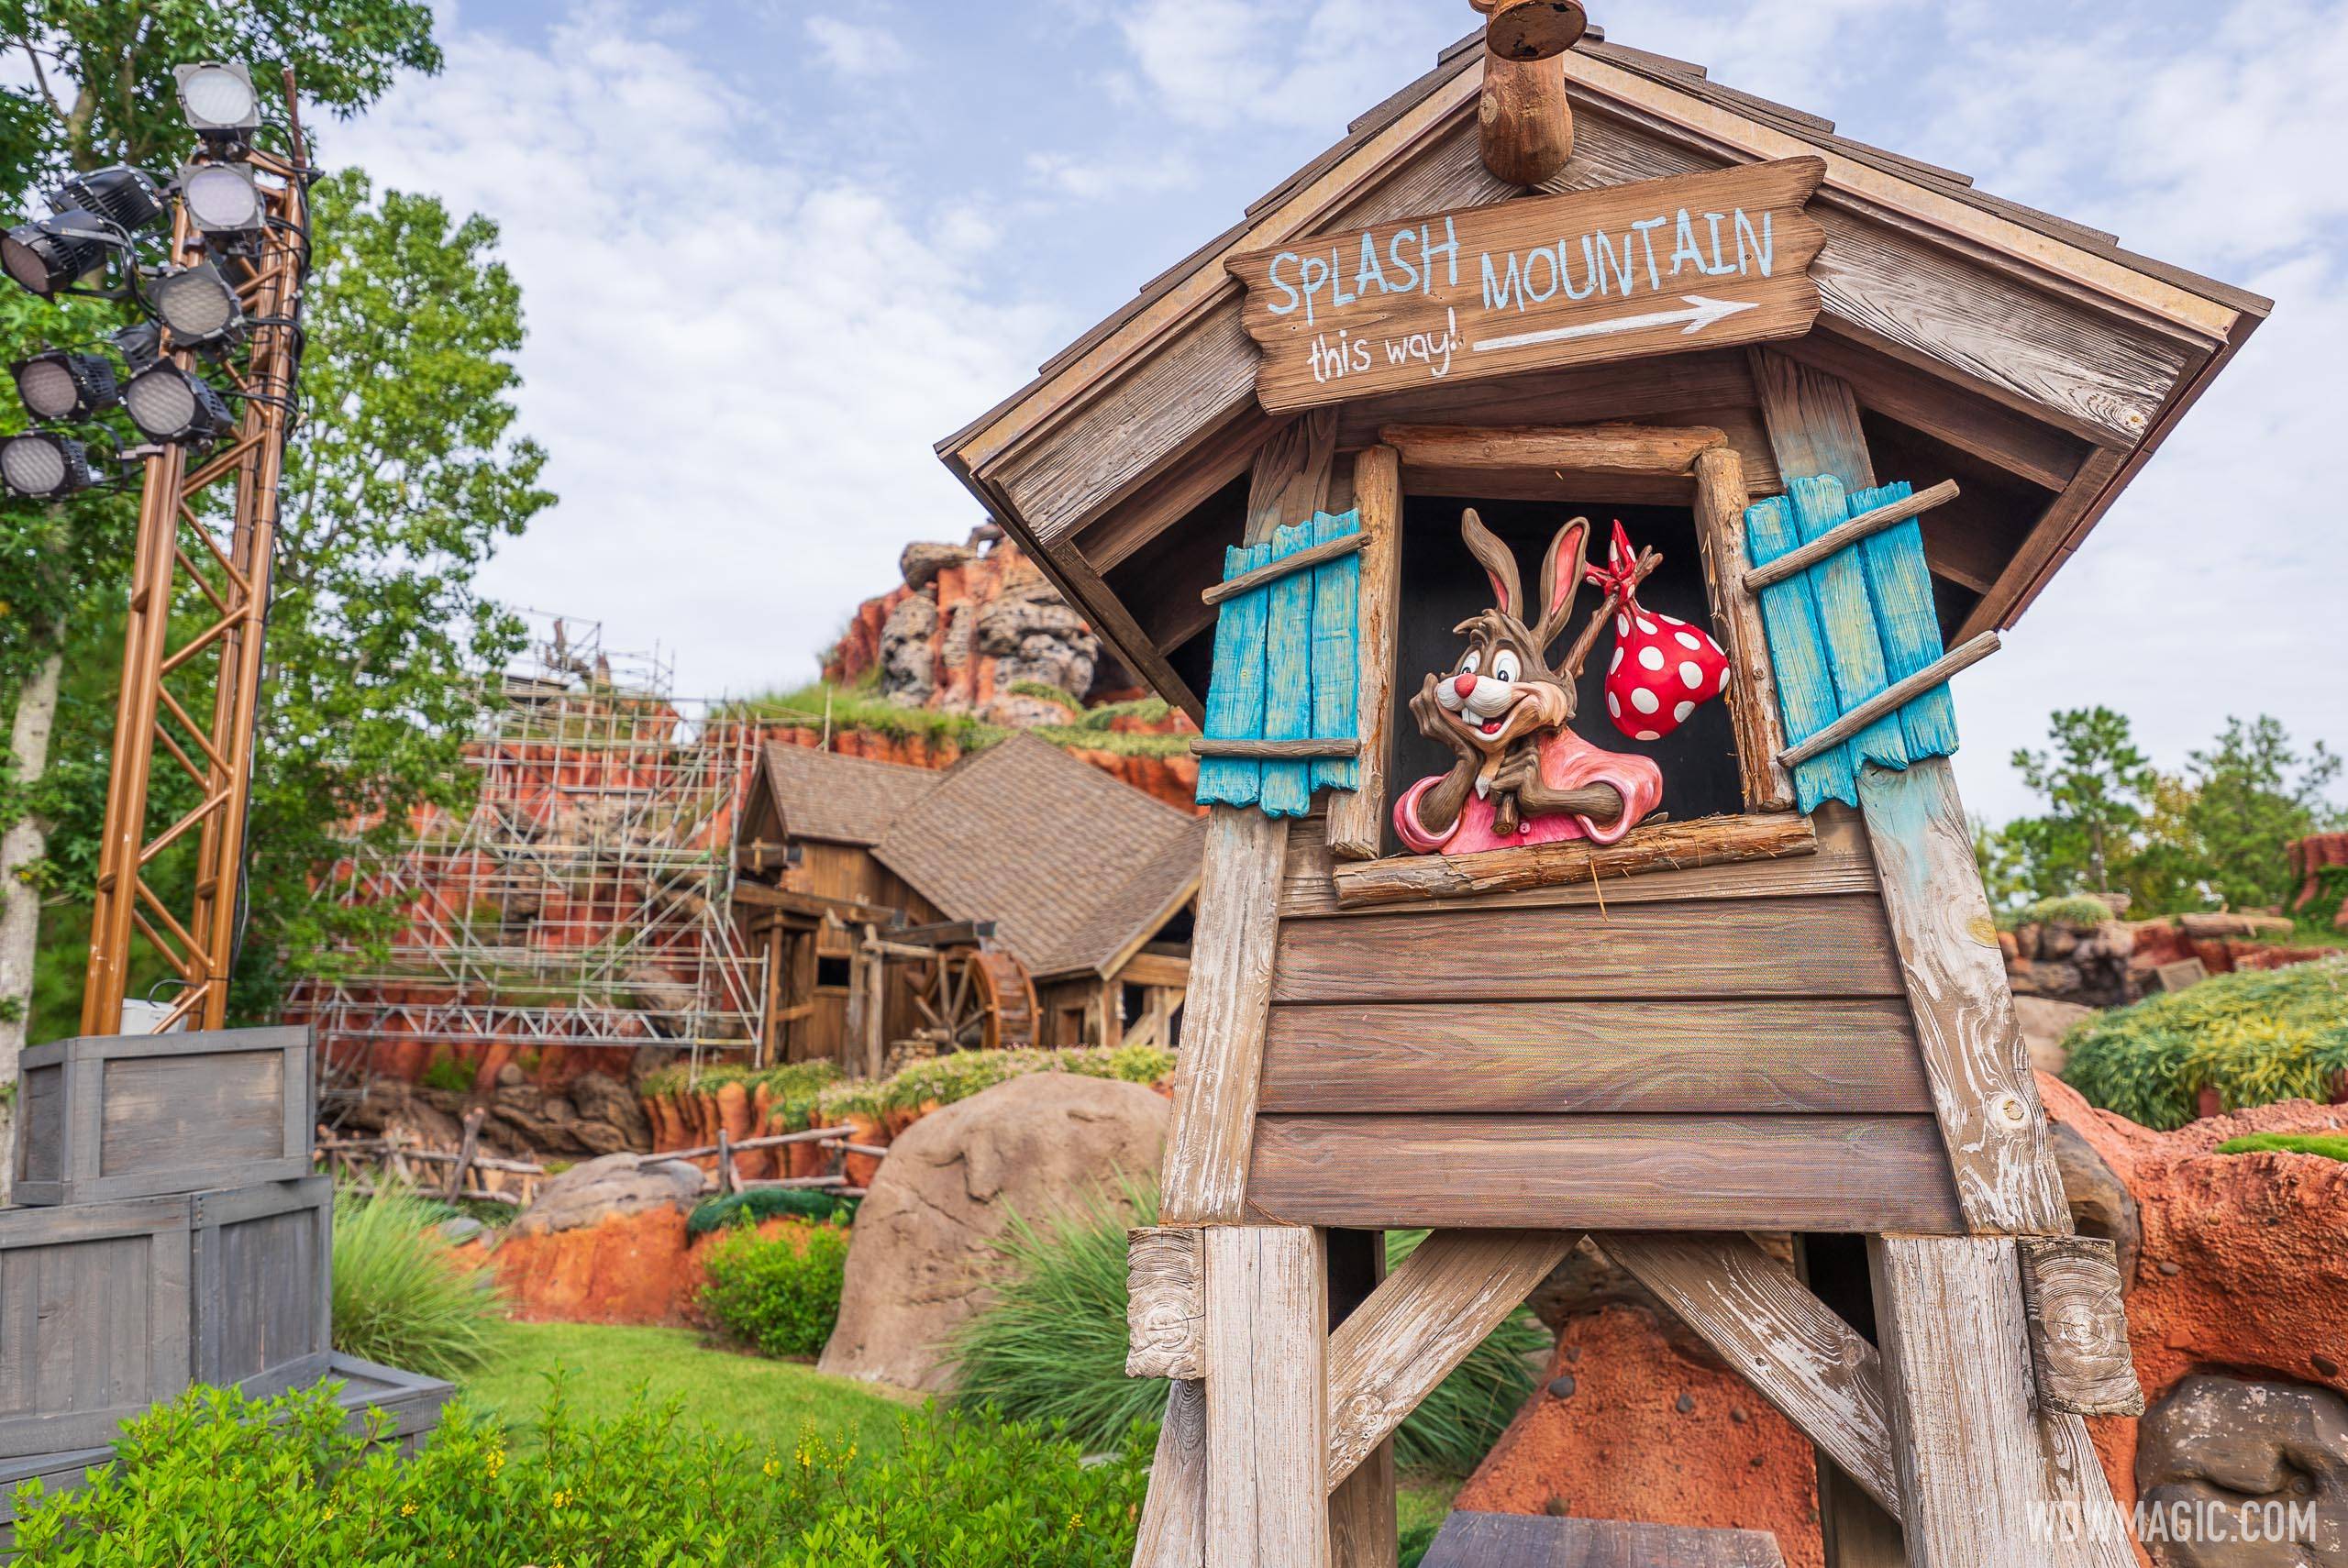 More scaffolding up at Disney World's Splash Mountain as refurbishment continues